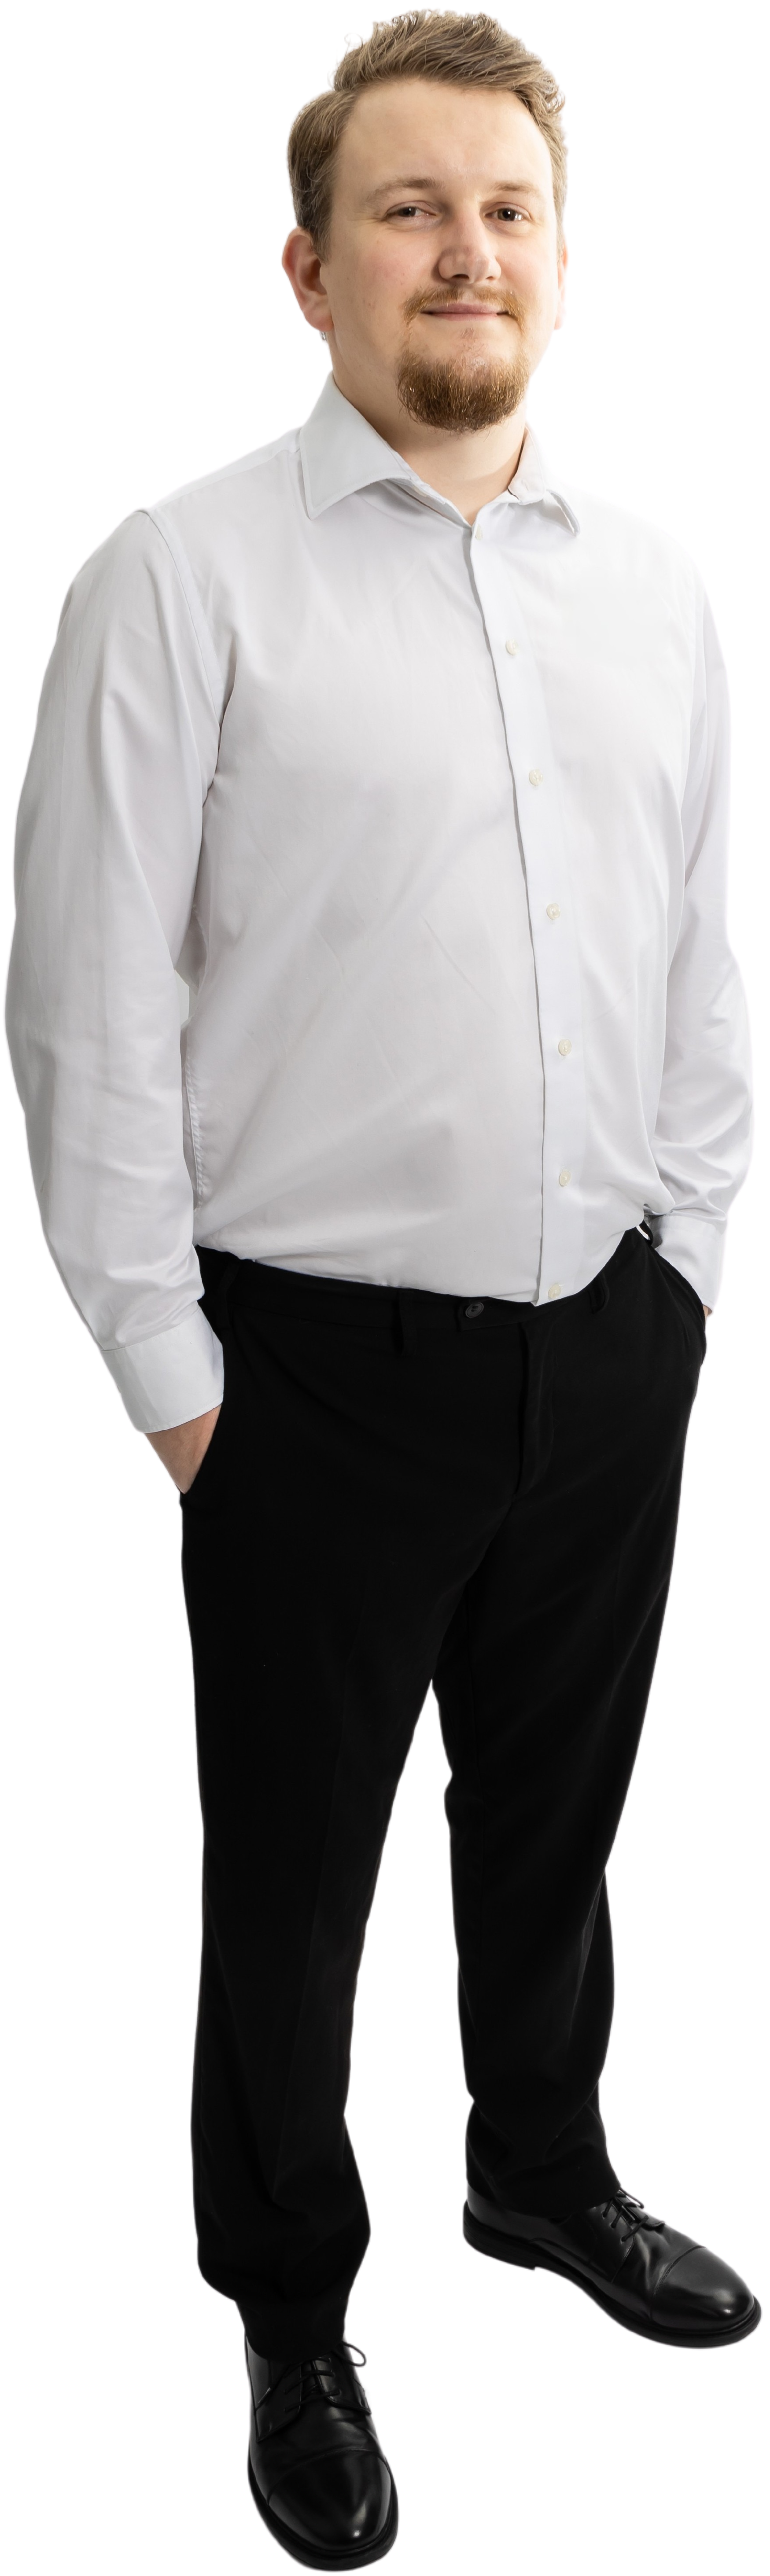 Graeme Lambert in a white shirt and black pants standing with his hands in his pockets